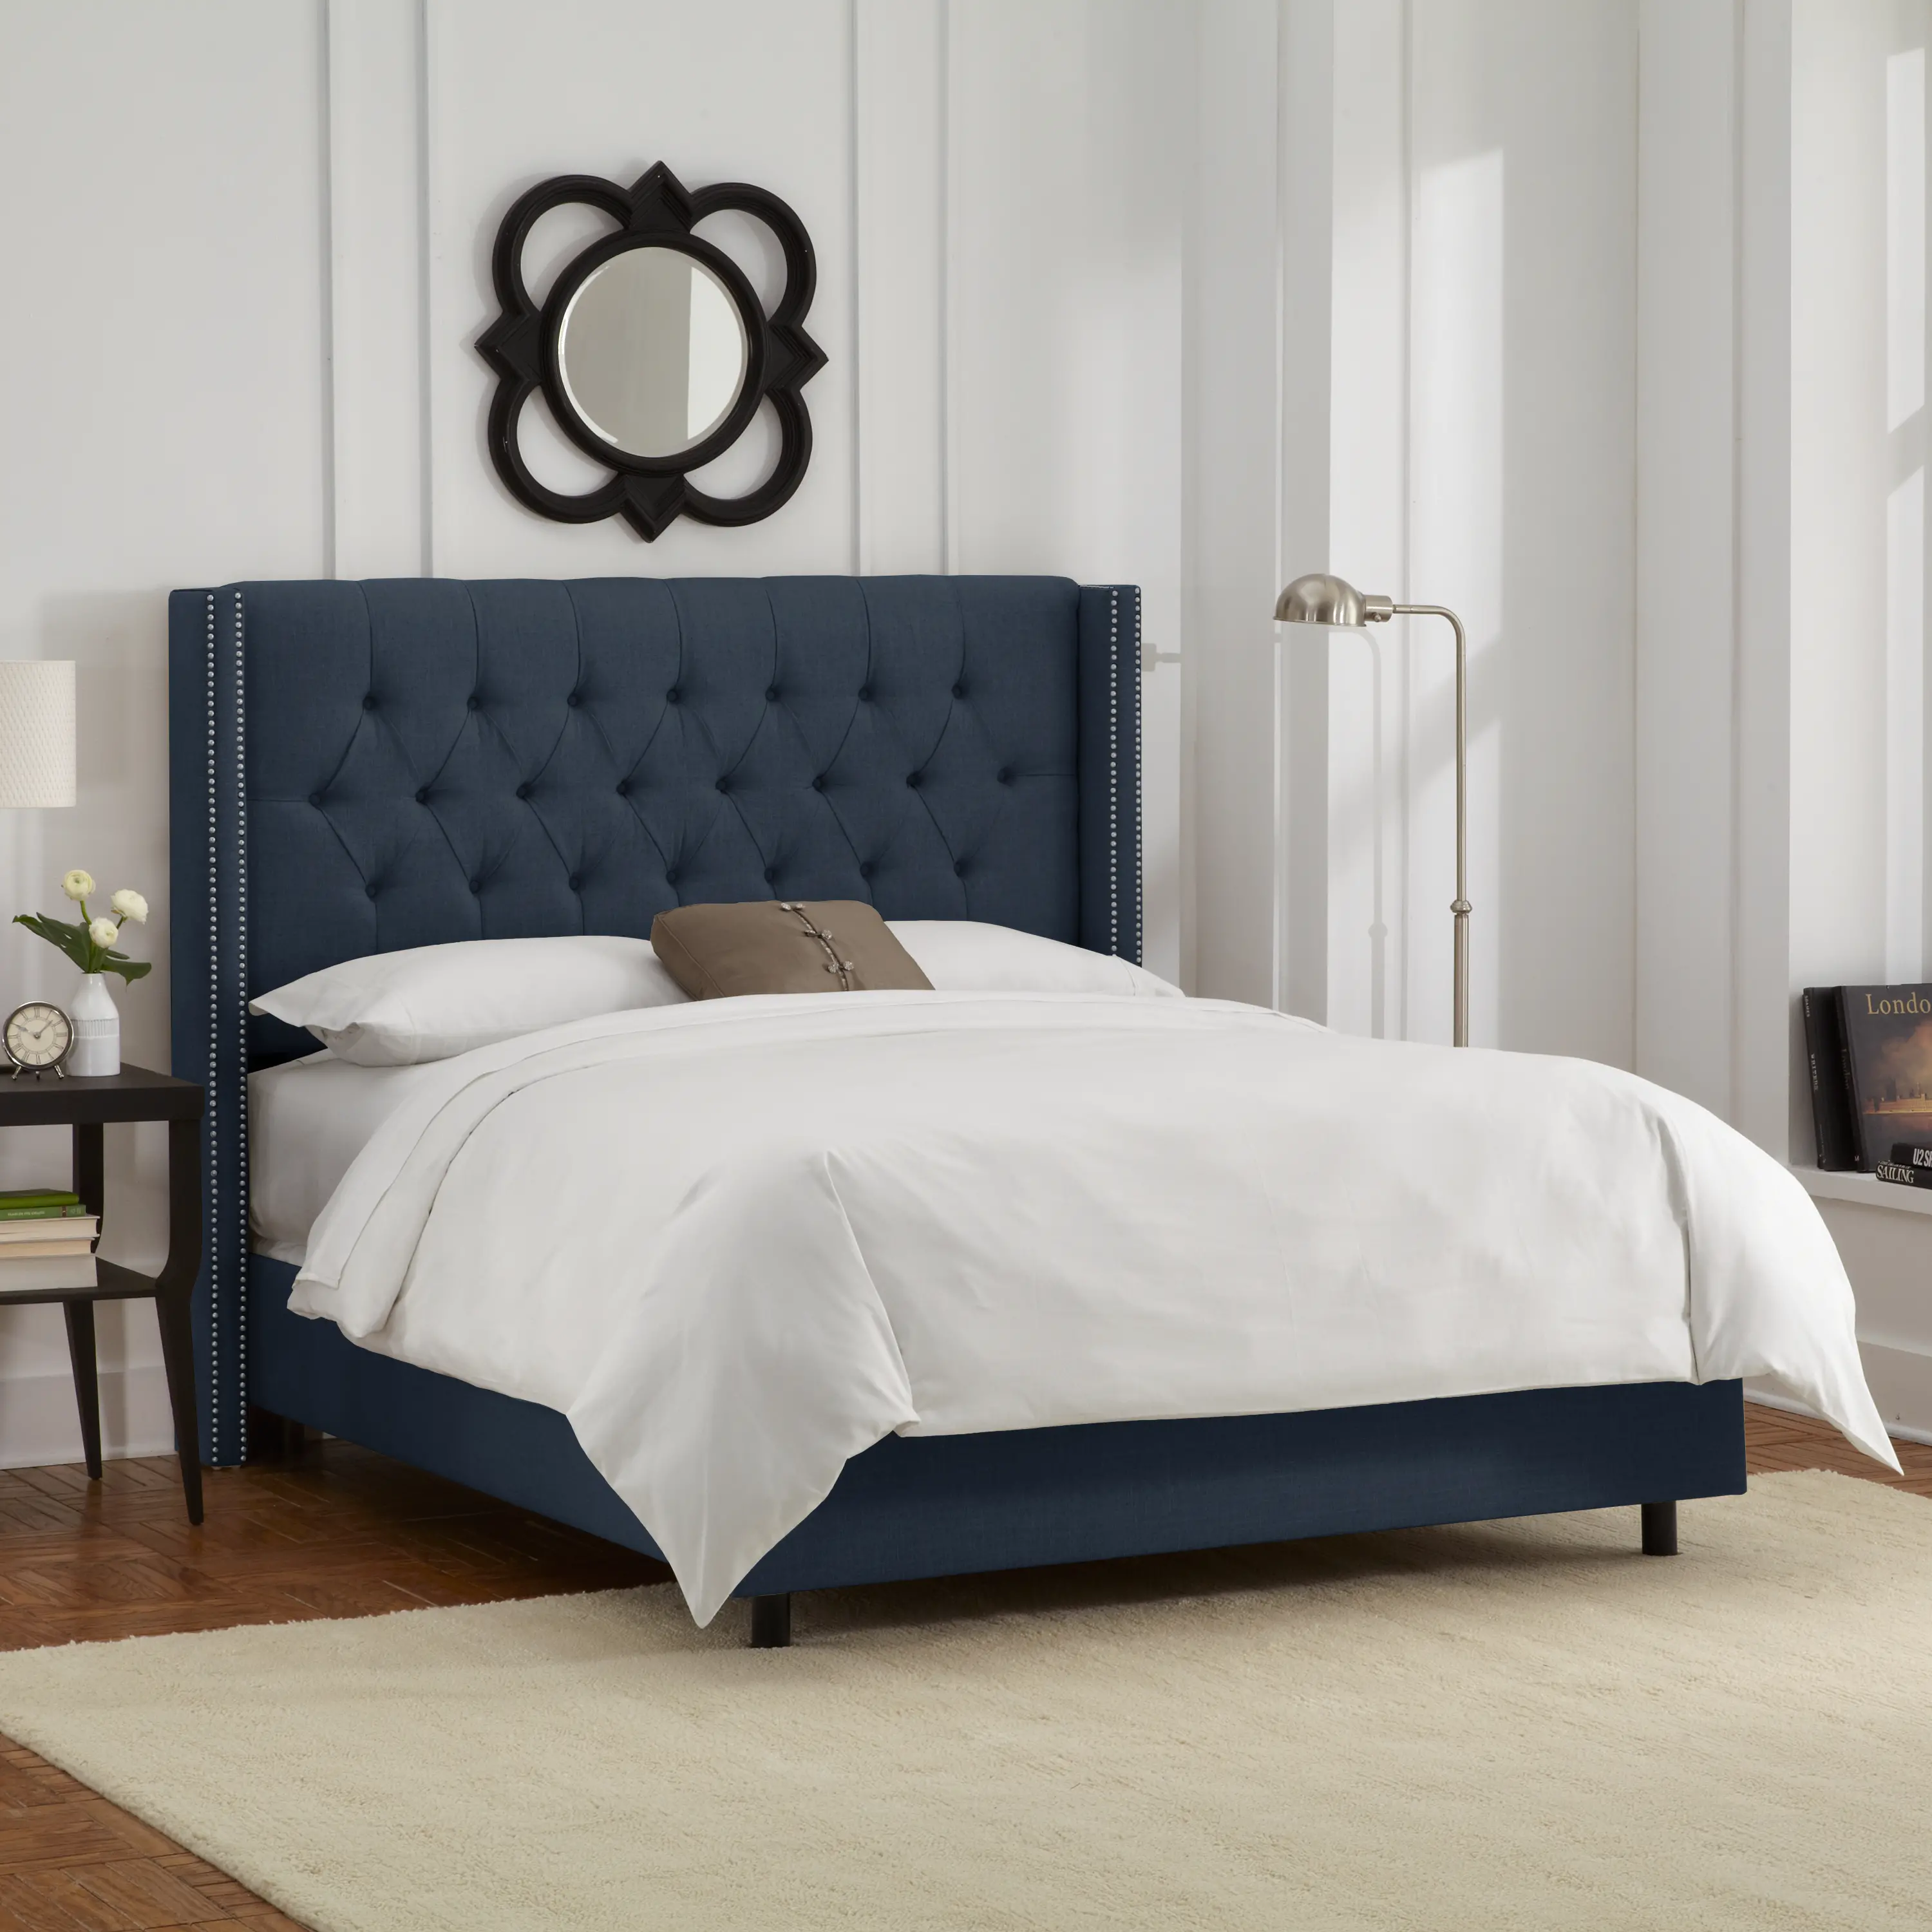 Abigail Navy Blue Diamond Tufted Wingback Queen Bed - Skyline...